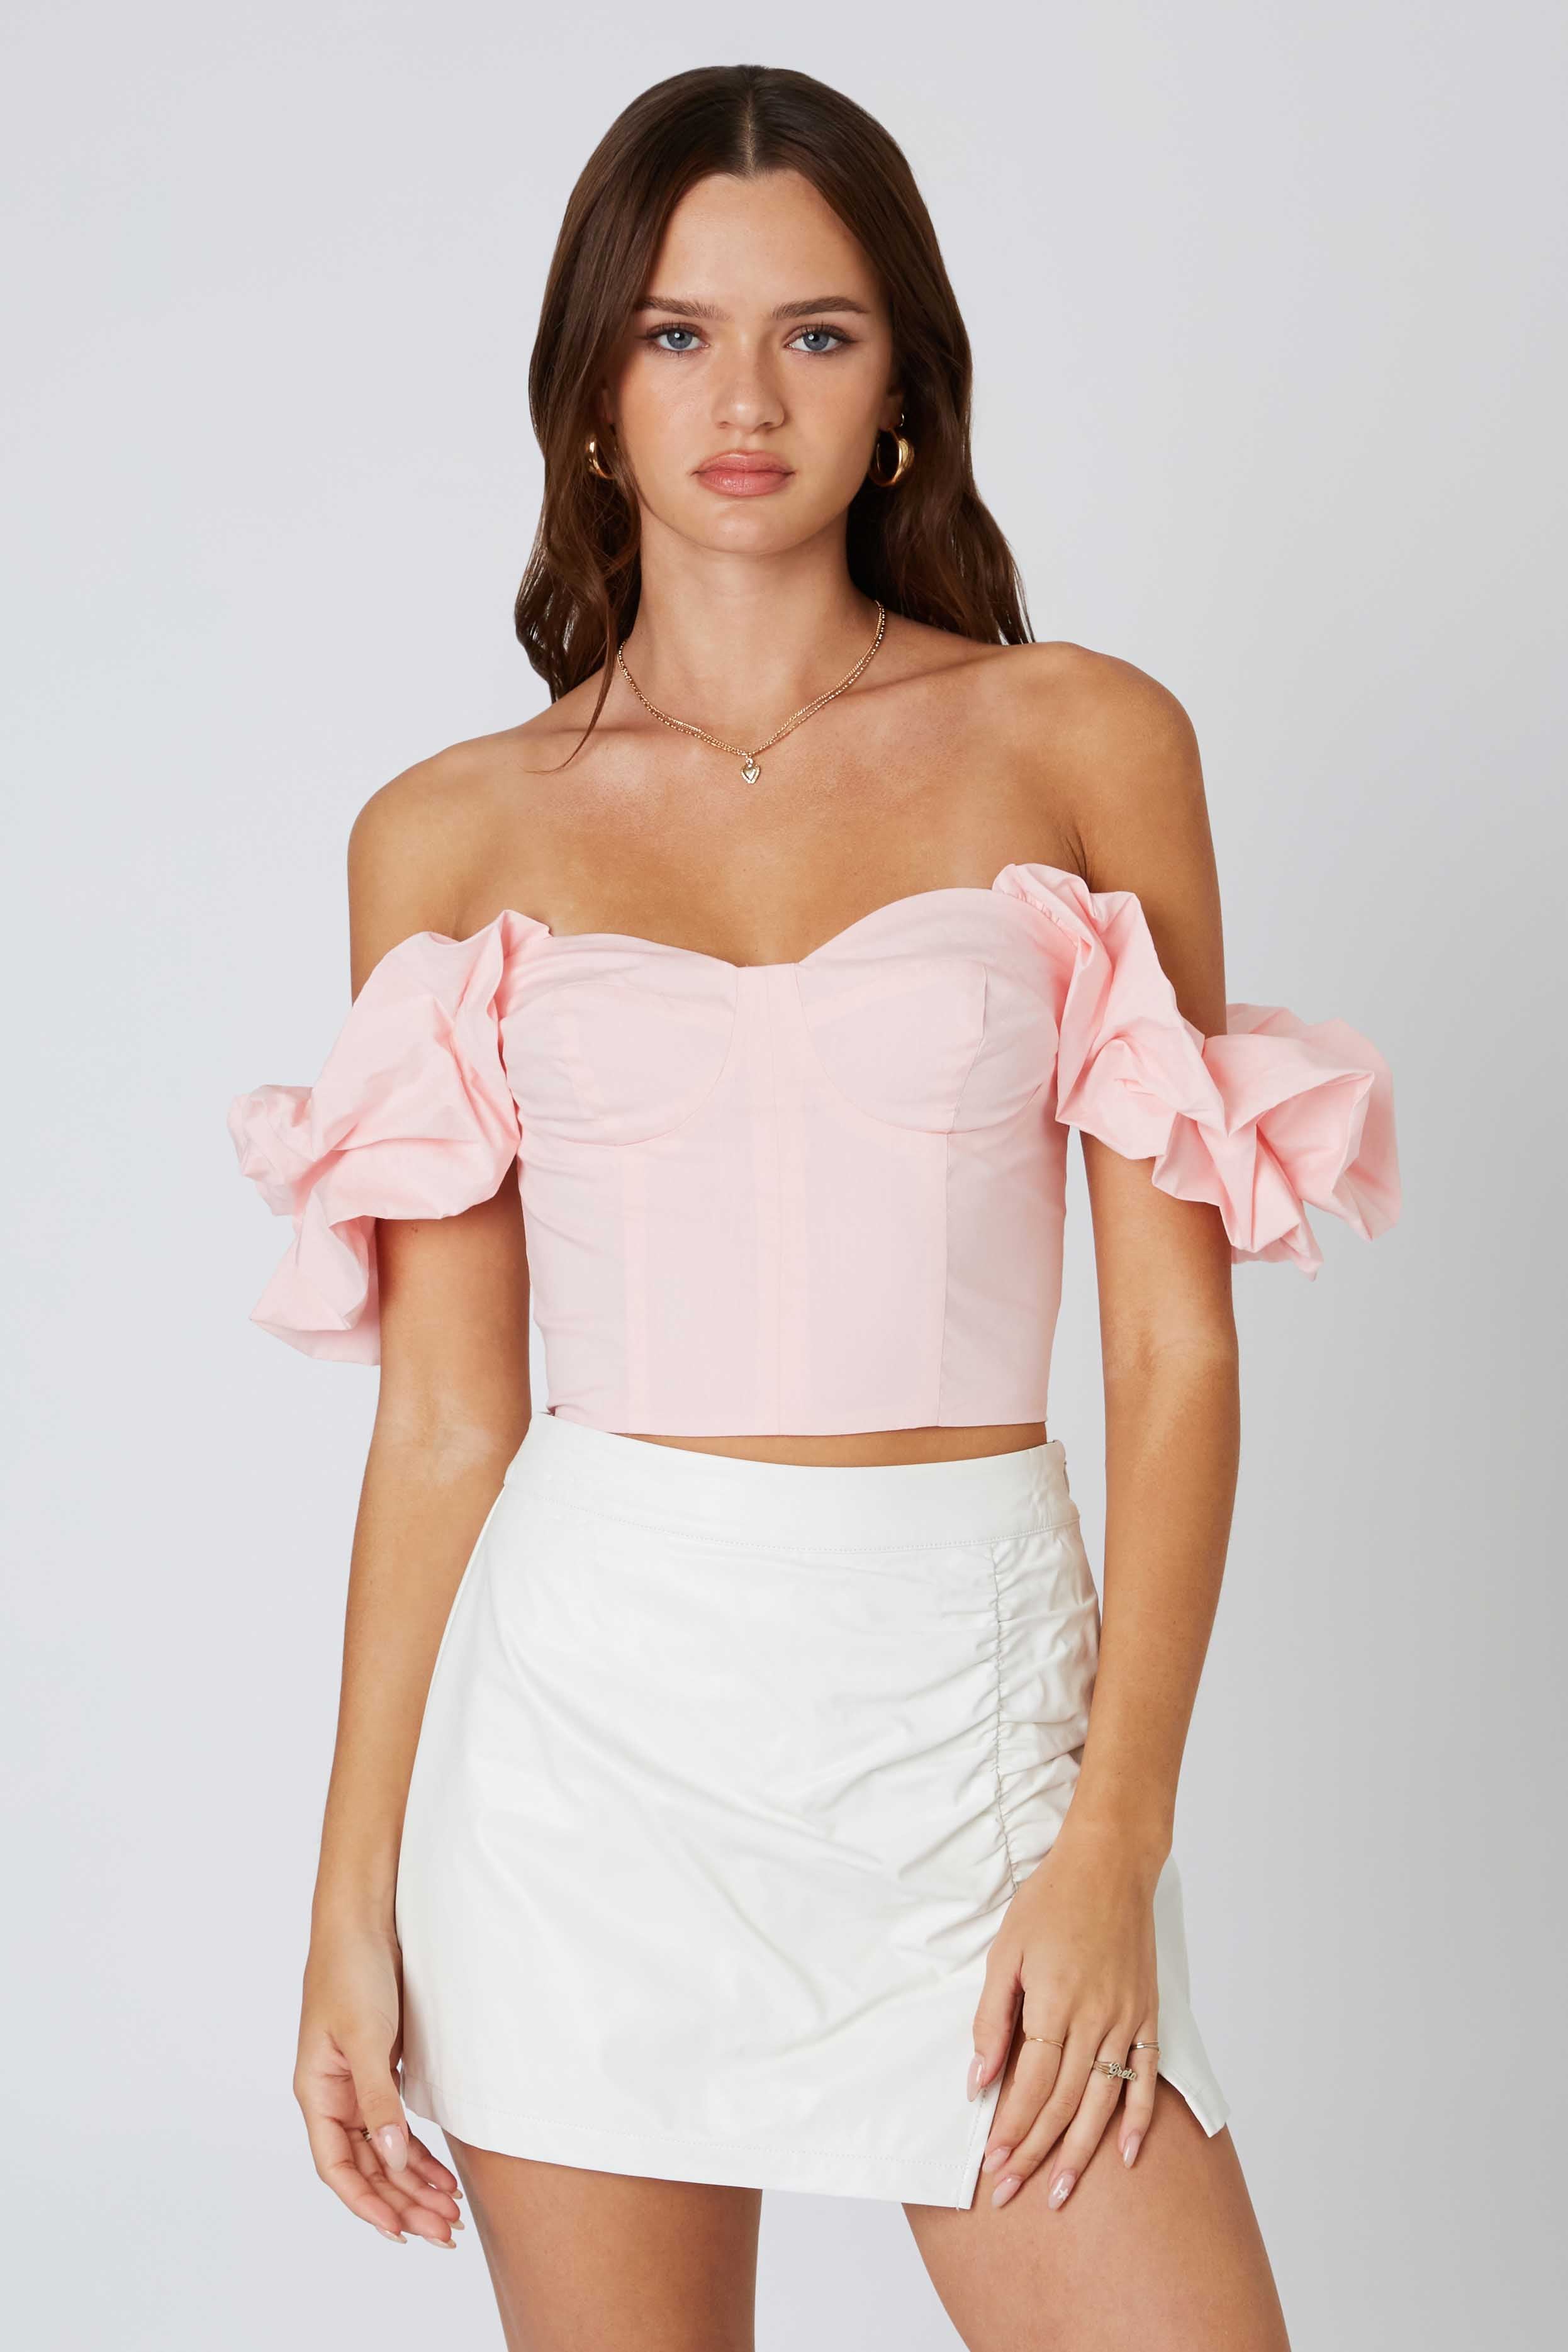 Off-Shoulder Corset in Blush Front View